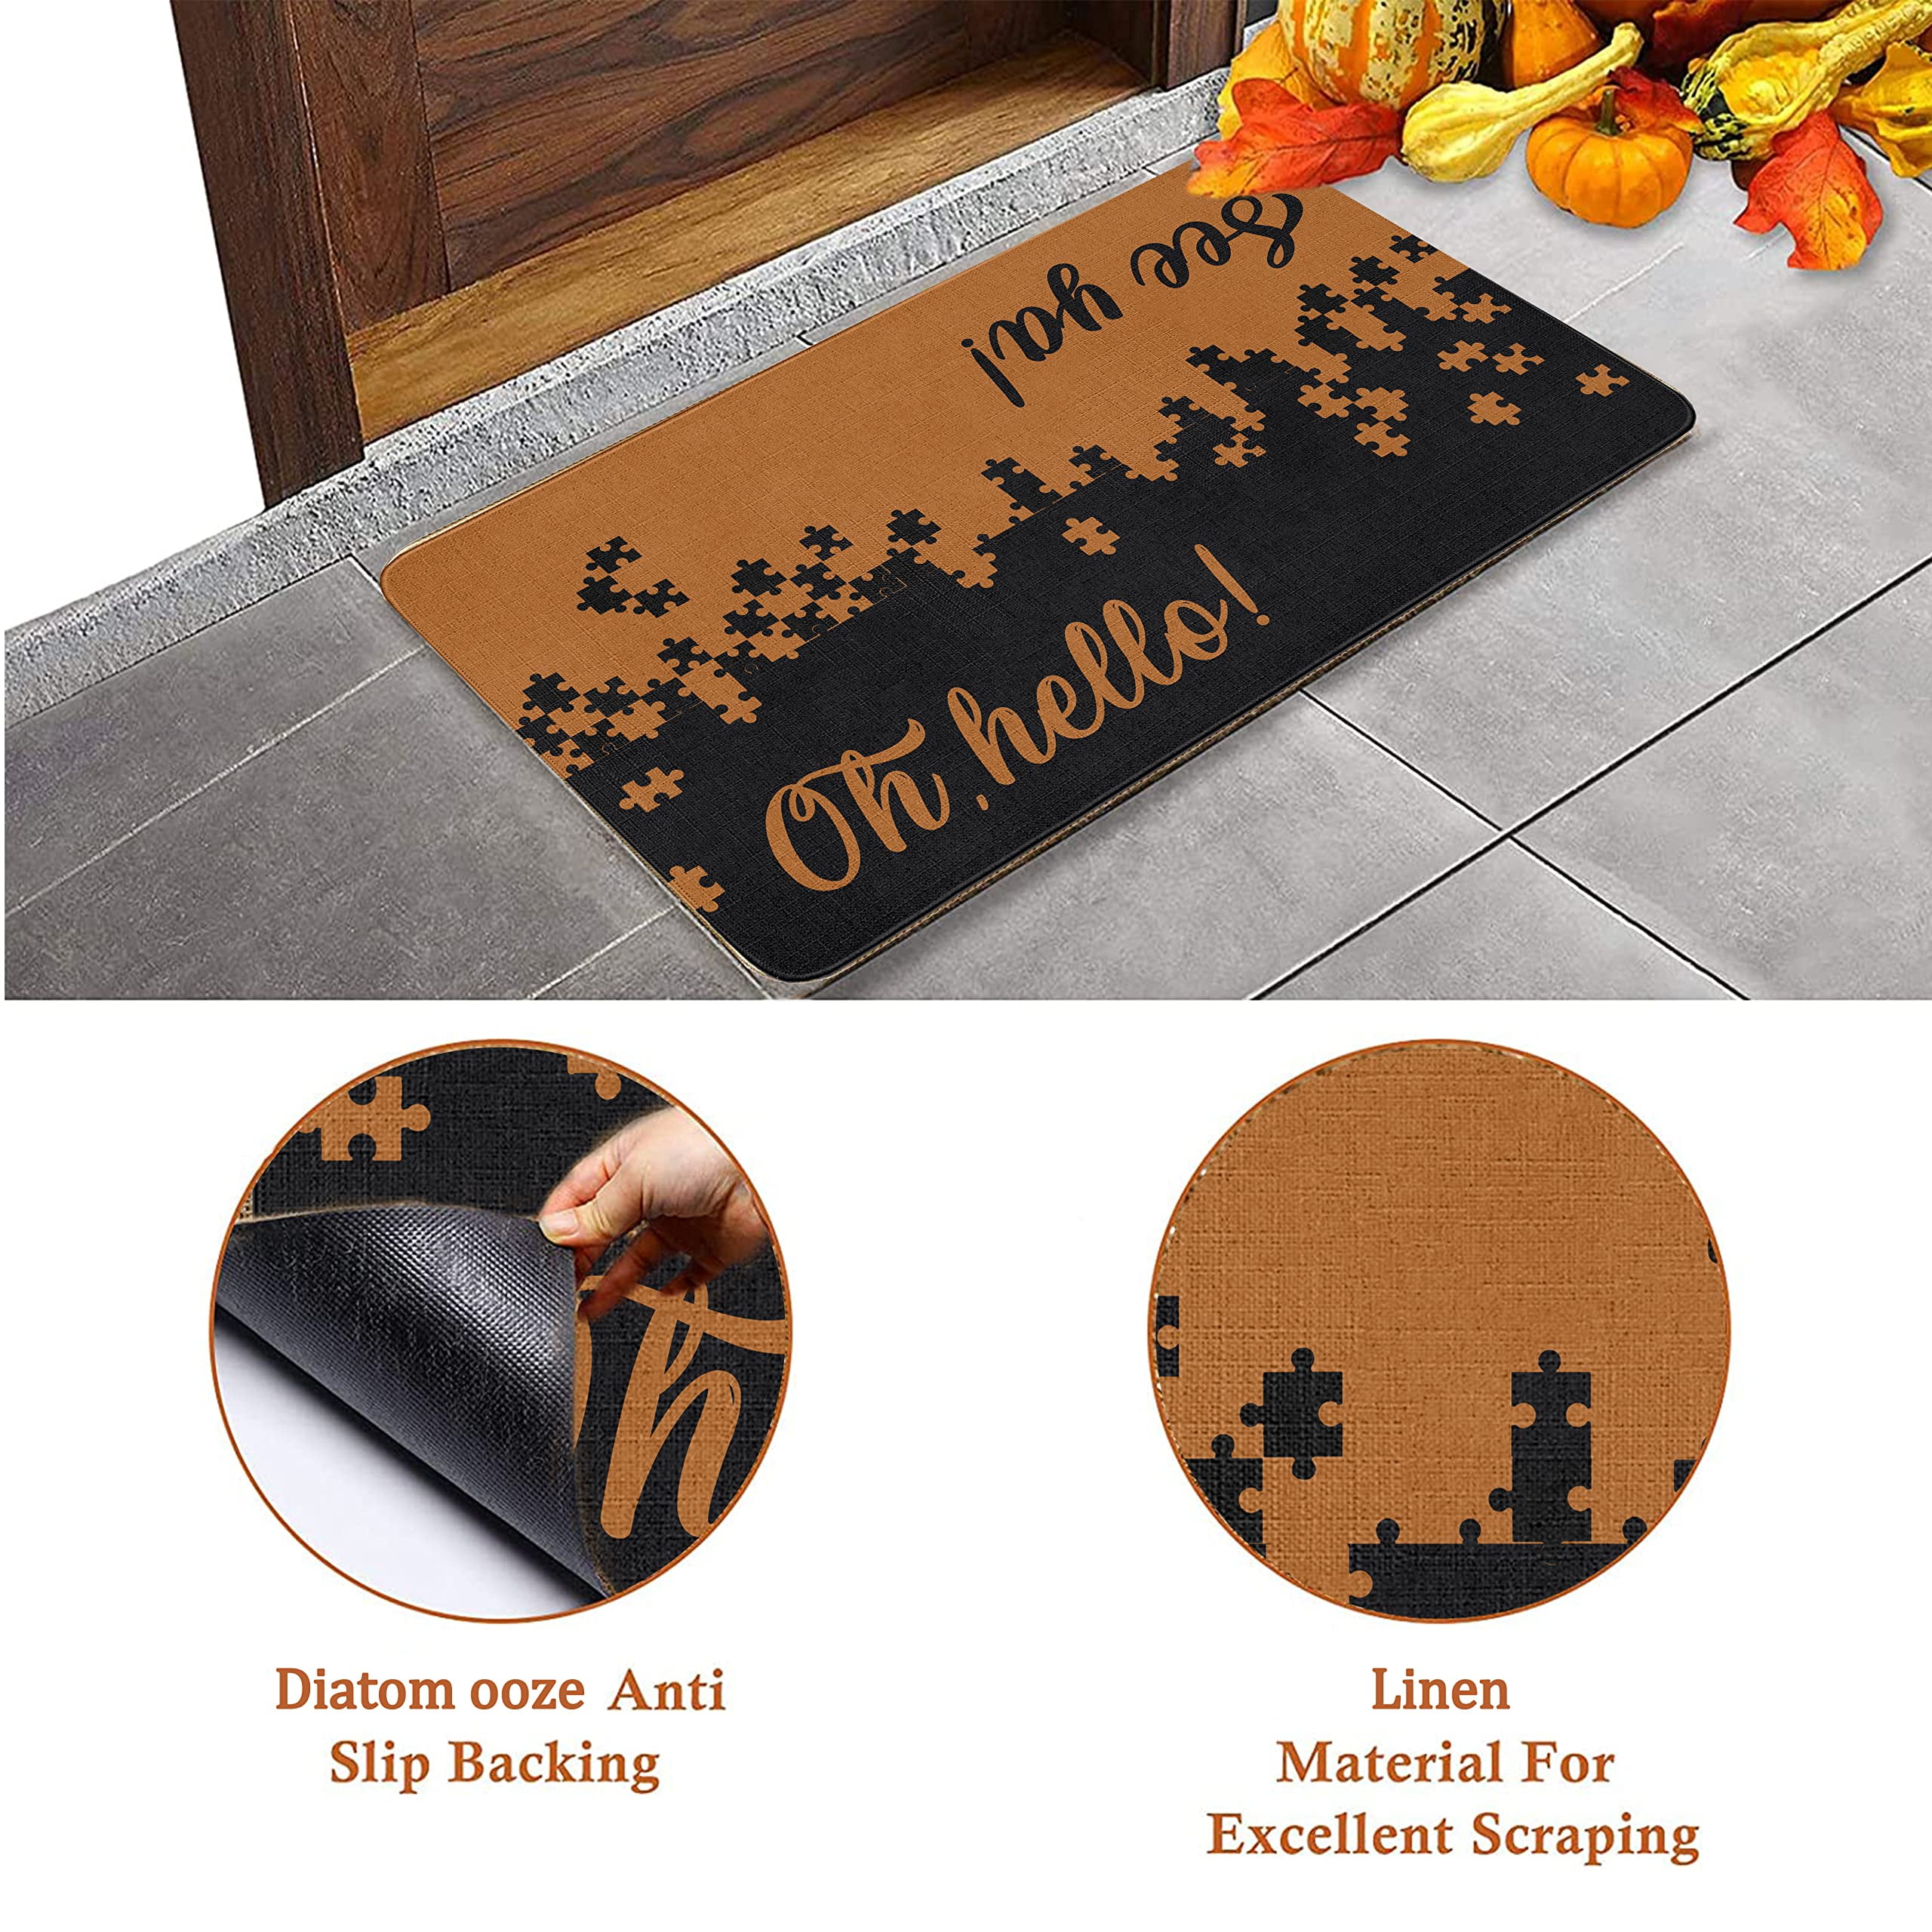 Hello Door Mat Outdoor Entry Rug, Waterproof Door Mat for Inside Entryway  Decor, Funny Welcome Mat Outdoor with Cute Text and Pattern for Home Decor  or Dog Mat for Muddy Paws, 30x17Indoor